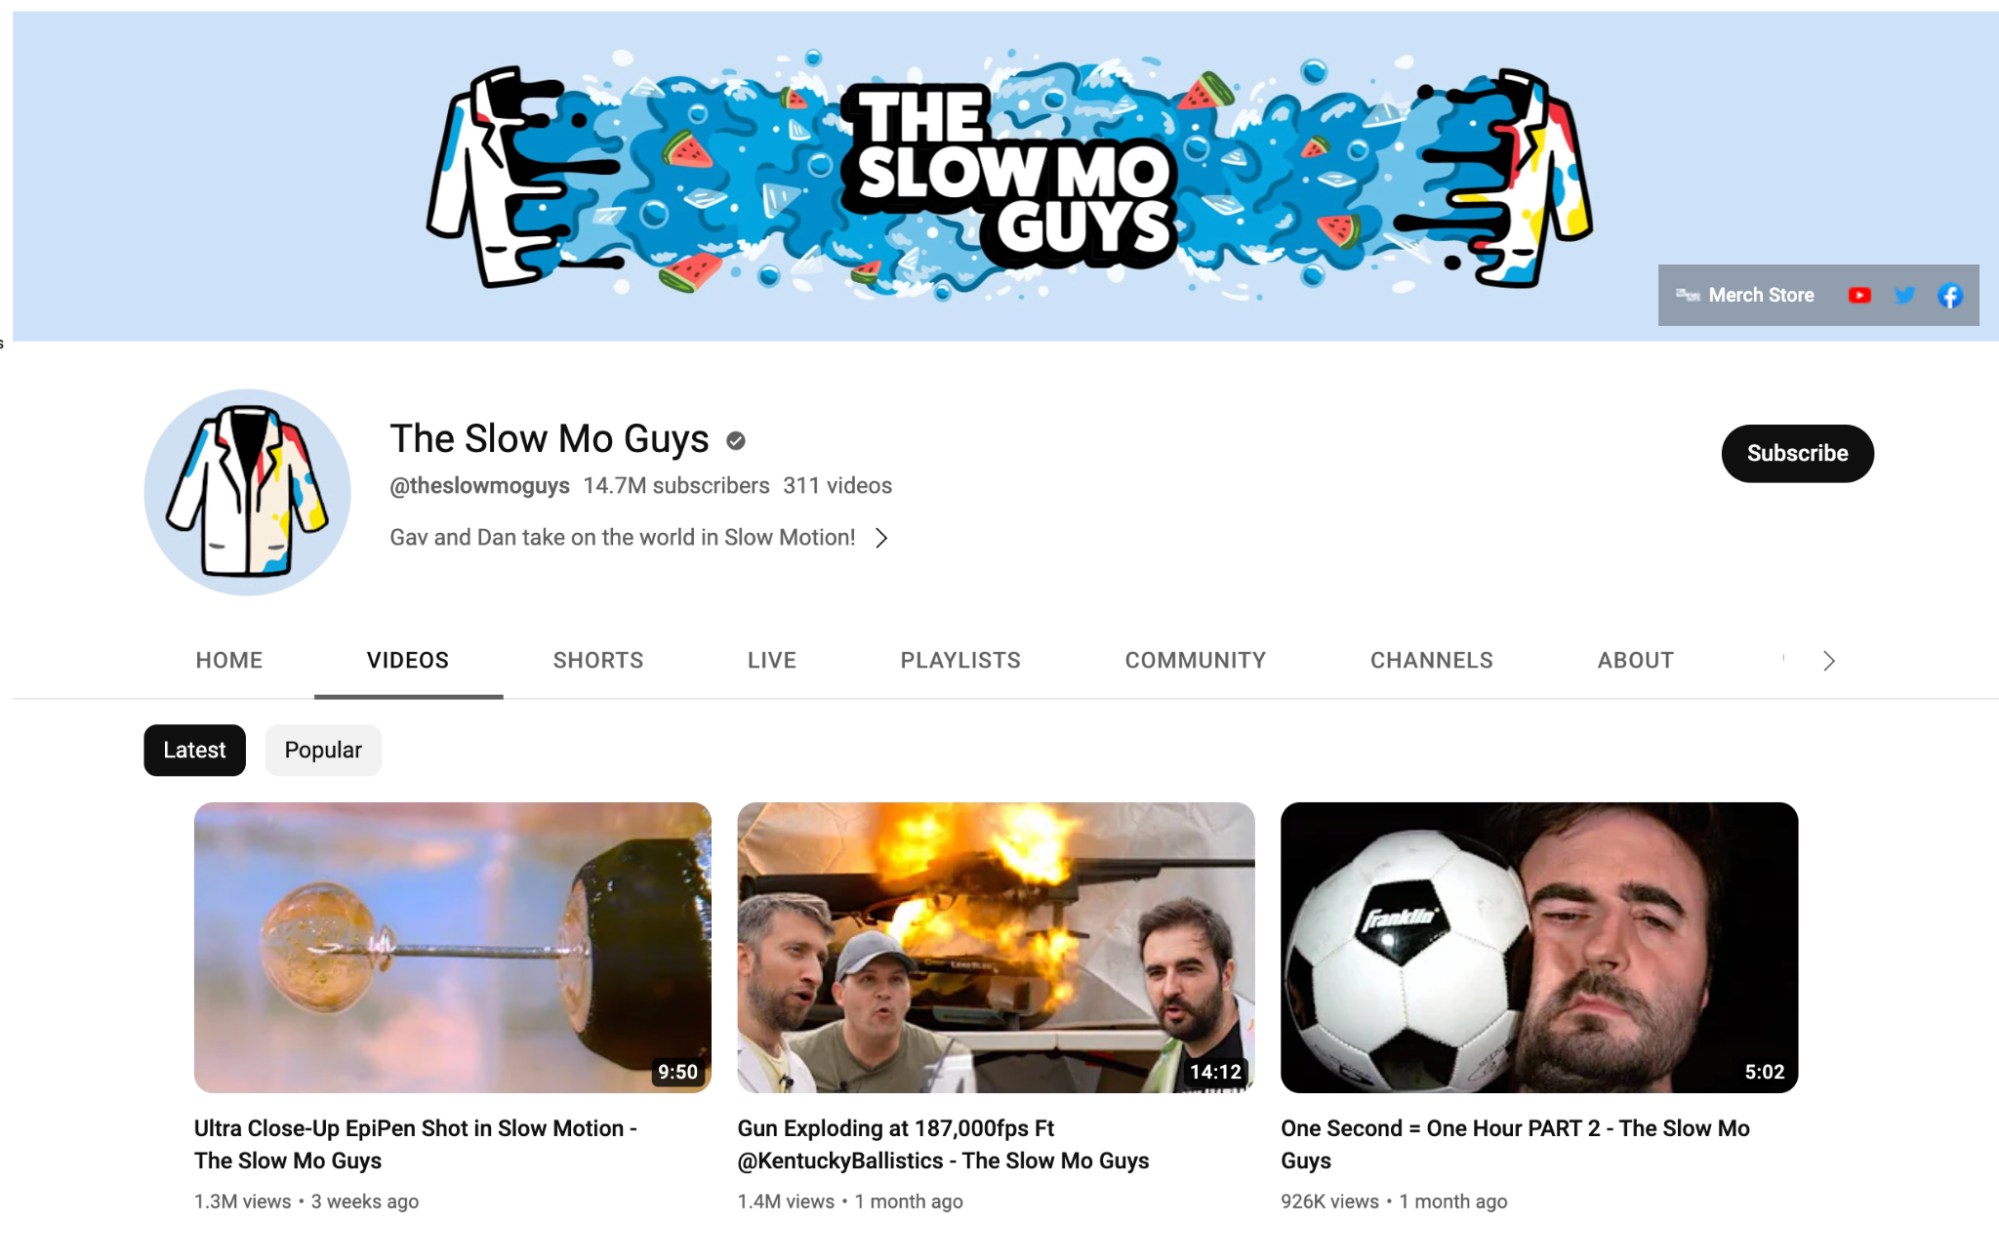 The Slo Mo Guys YouTube channel showing dynamic thumbnails containing fire and animated facial expressions.